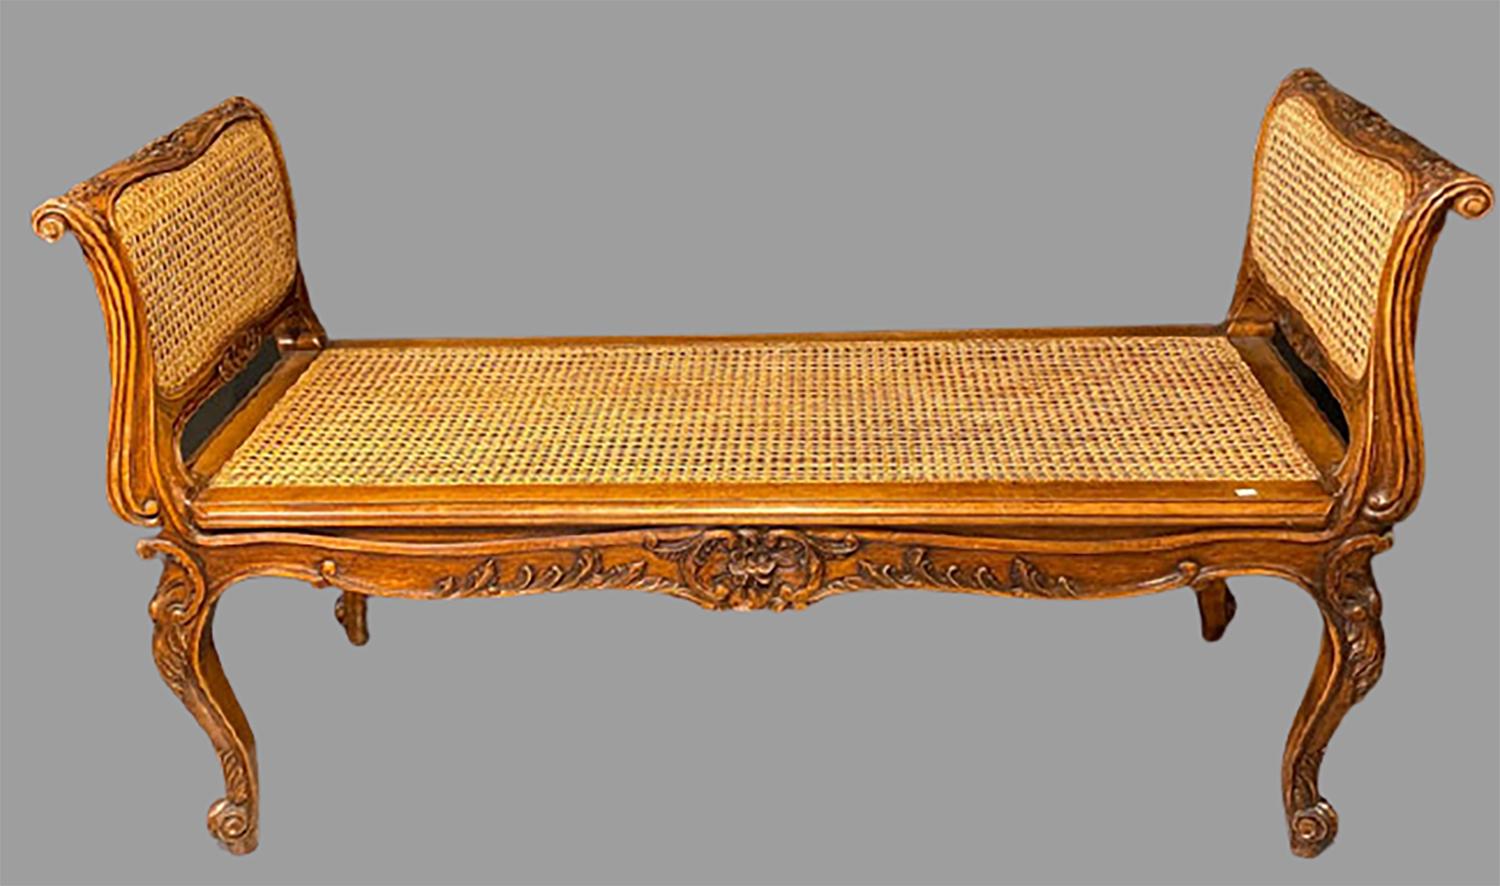 Louis XV style finely carved walnut window seat bench. The seat height is measured without the cushion 17.25 inches. This strong and sturdy window seat or bench is simply stunning and has been carved by a superb craftsman. The solid walnut bench is